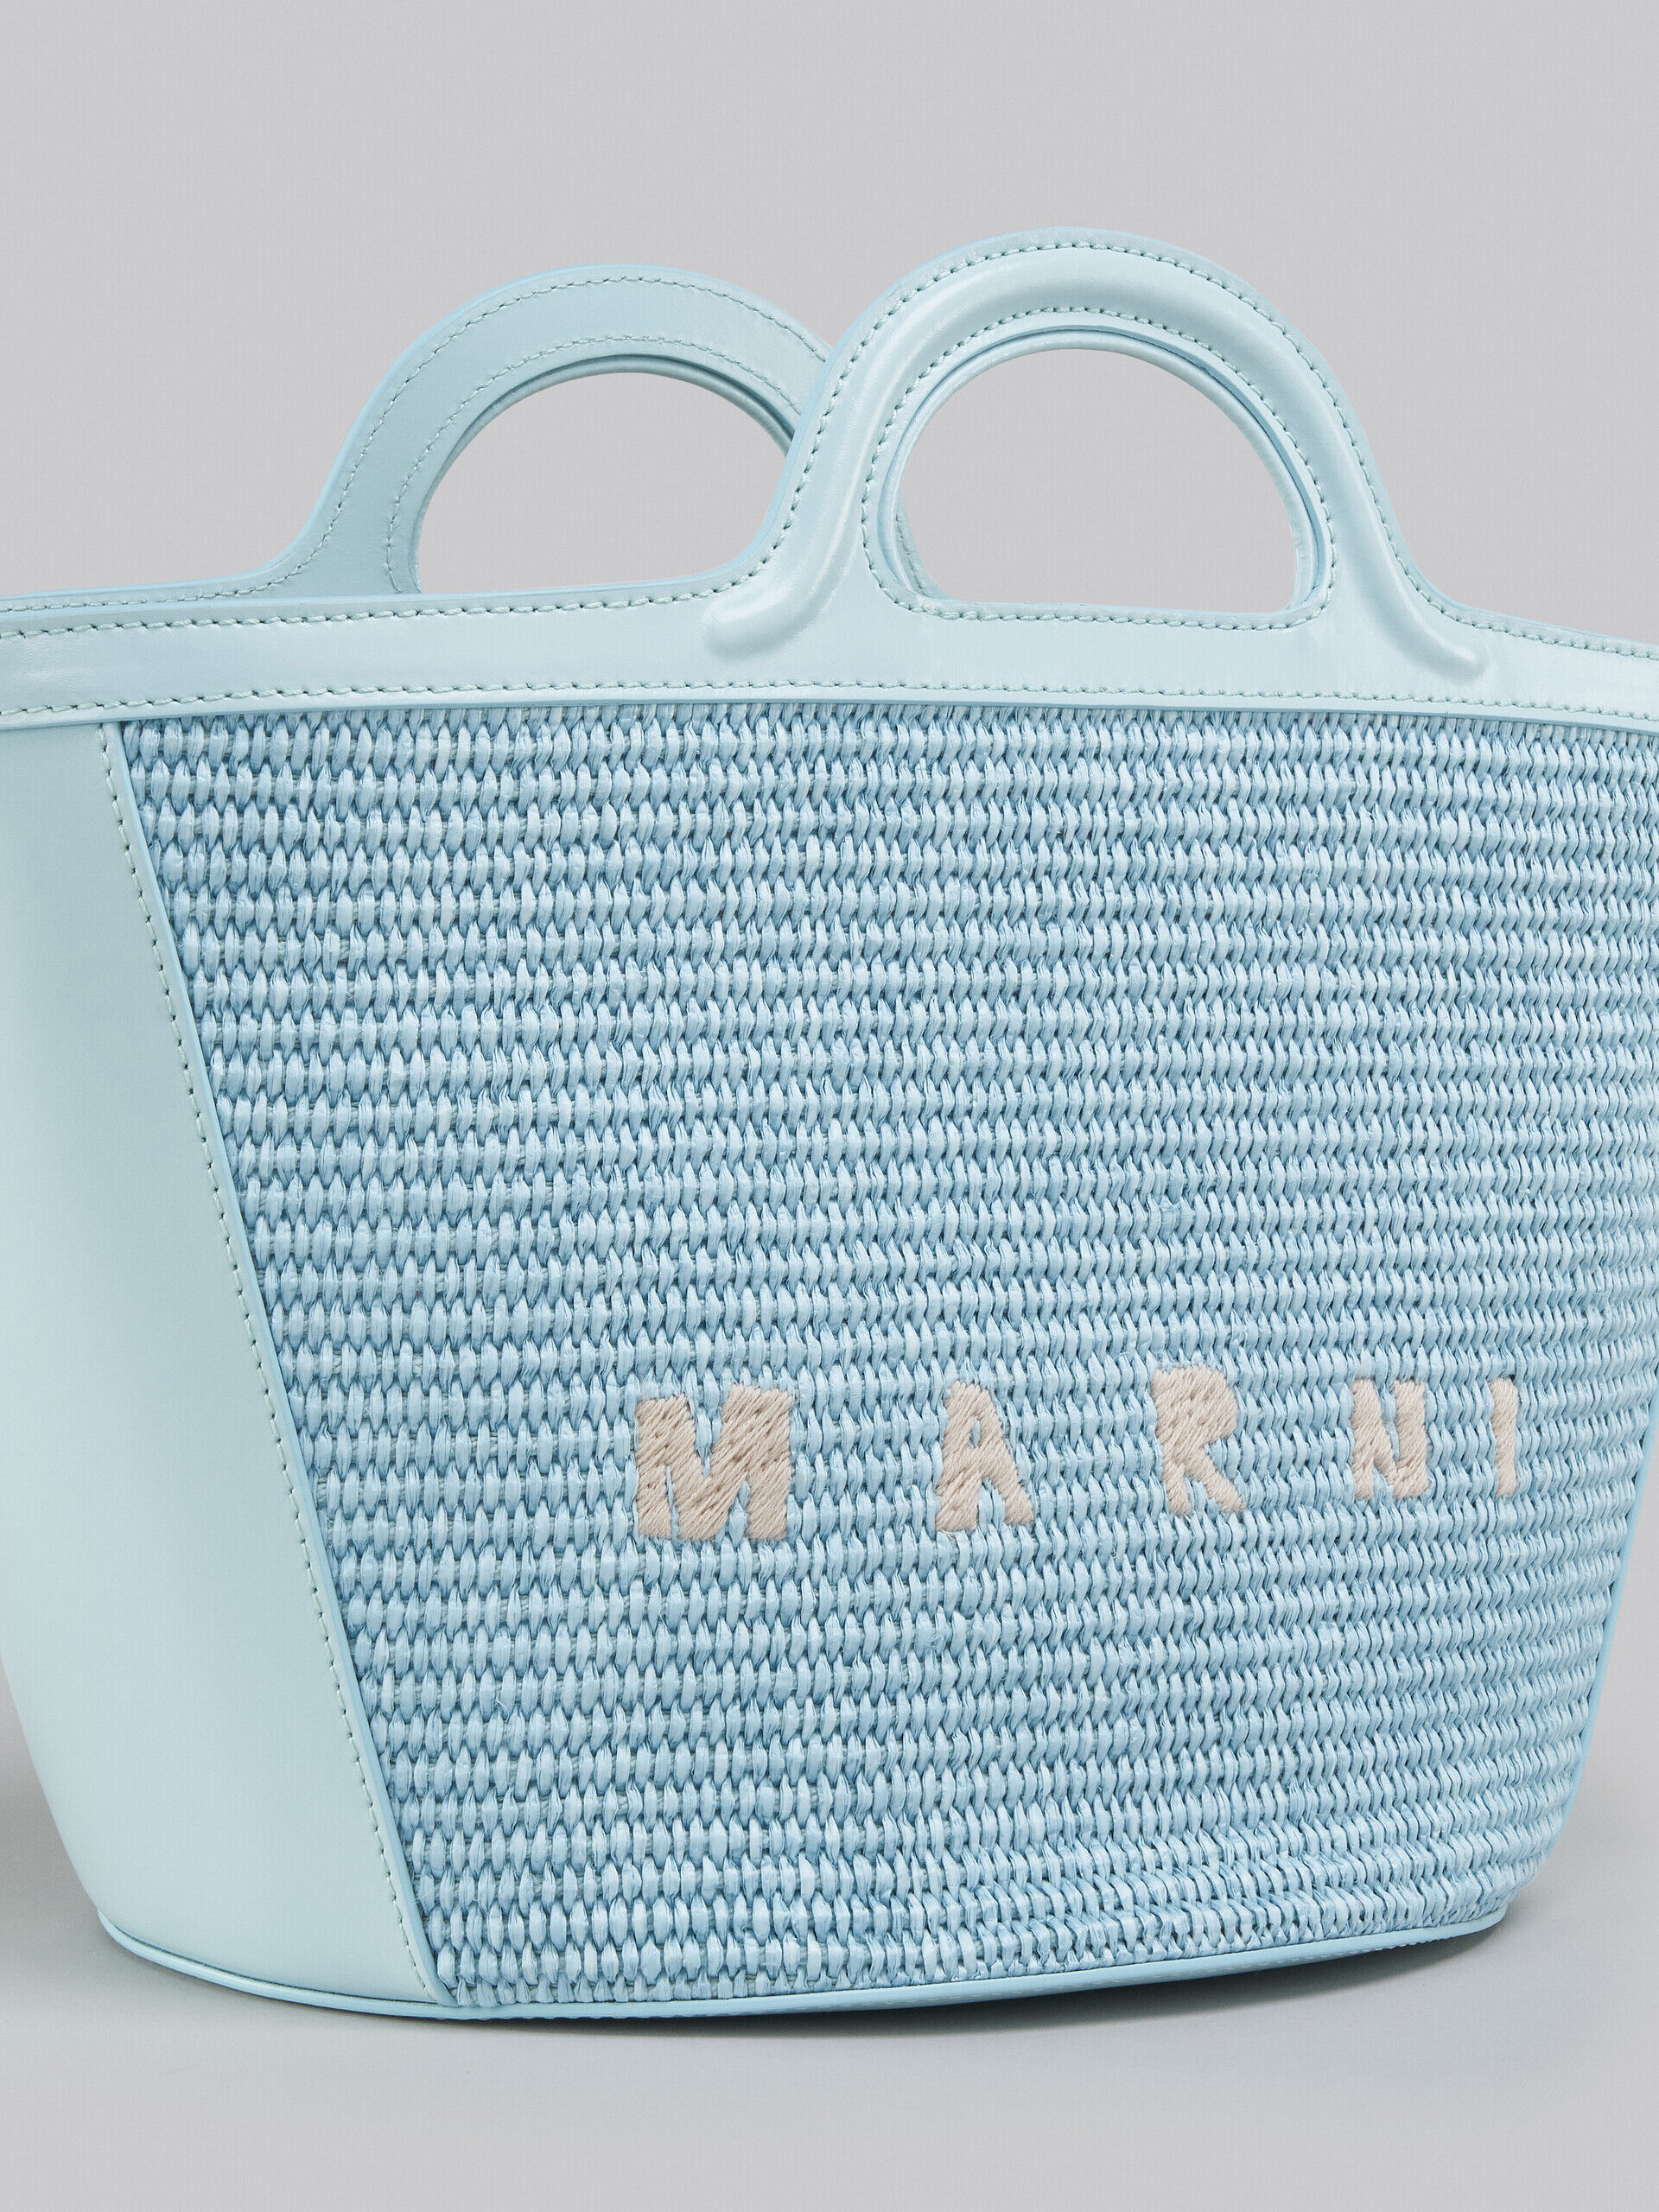 Tropicalia Small Bag in light blue leather and raffia-effect